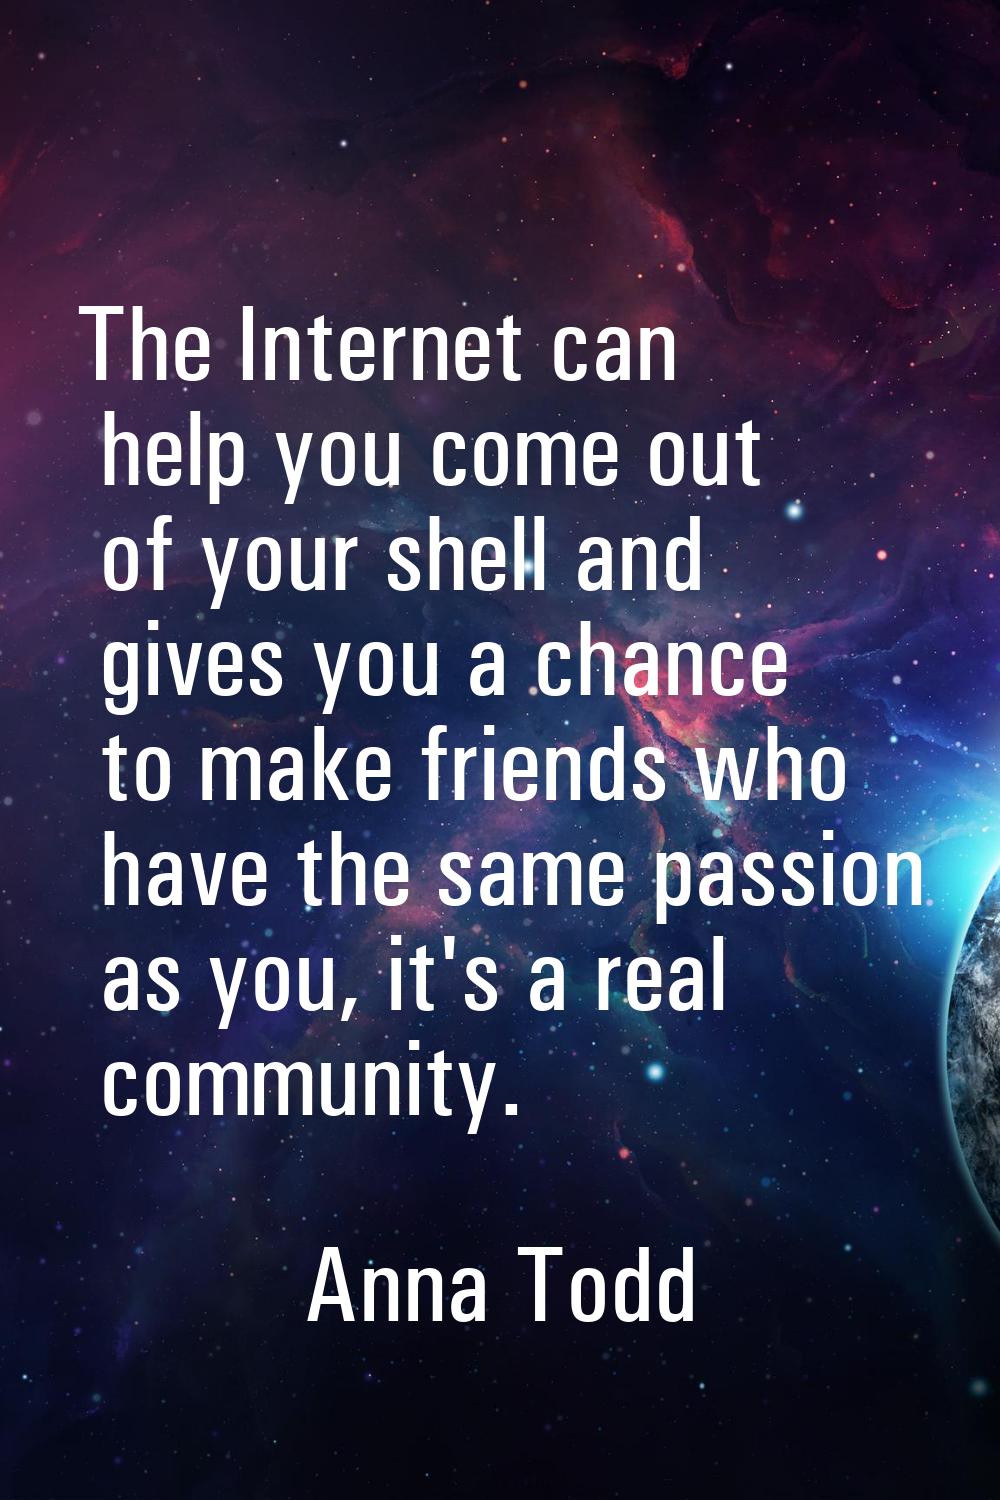 The Internet can help you come out of your shell and gives you a chance to make friends who have th